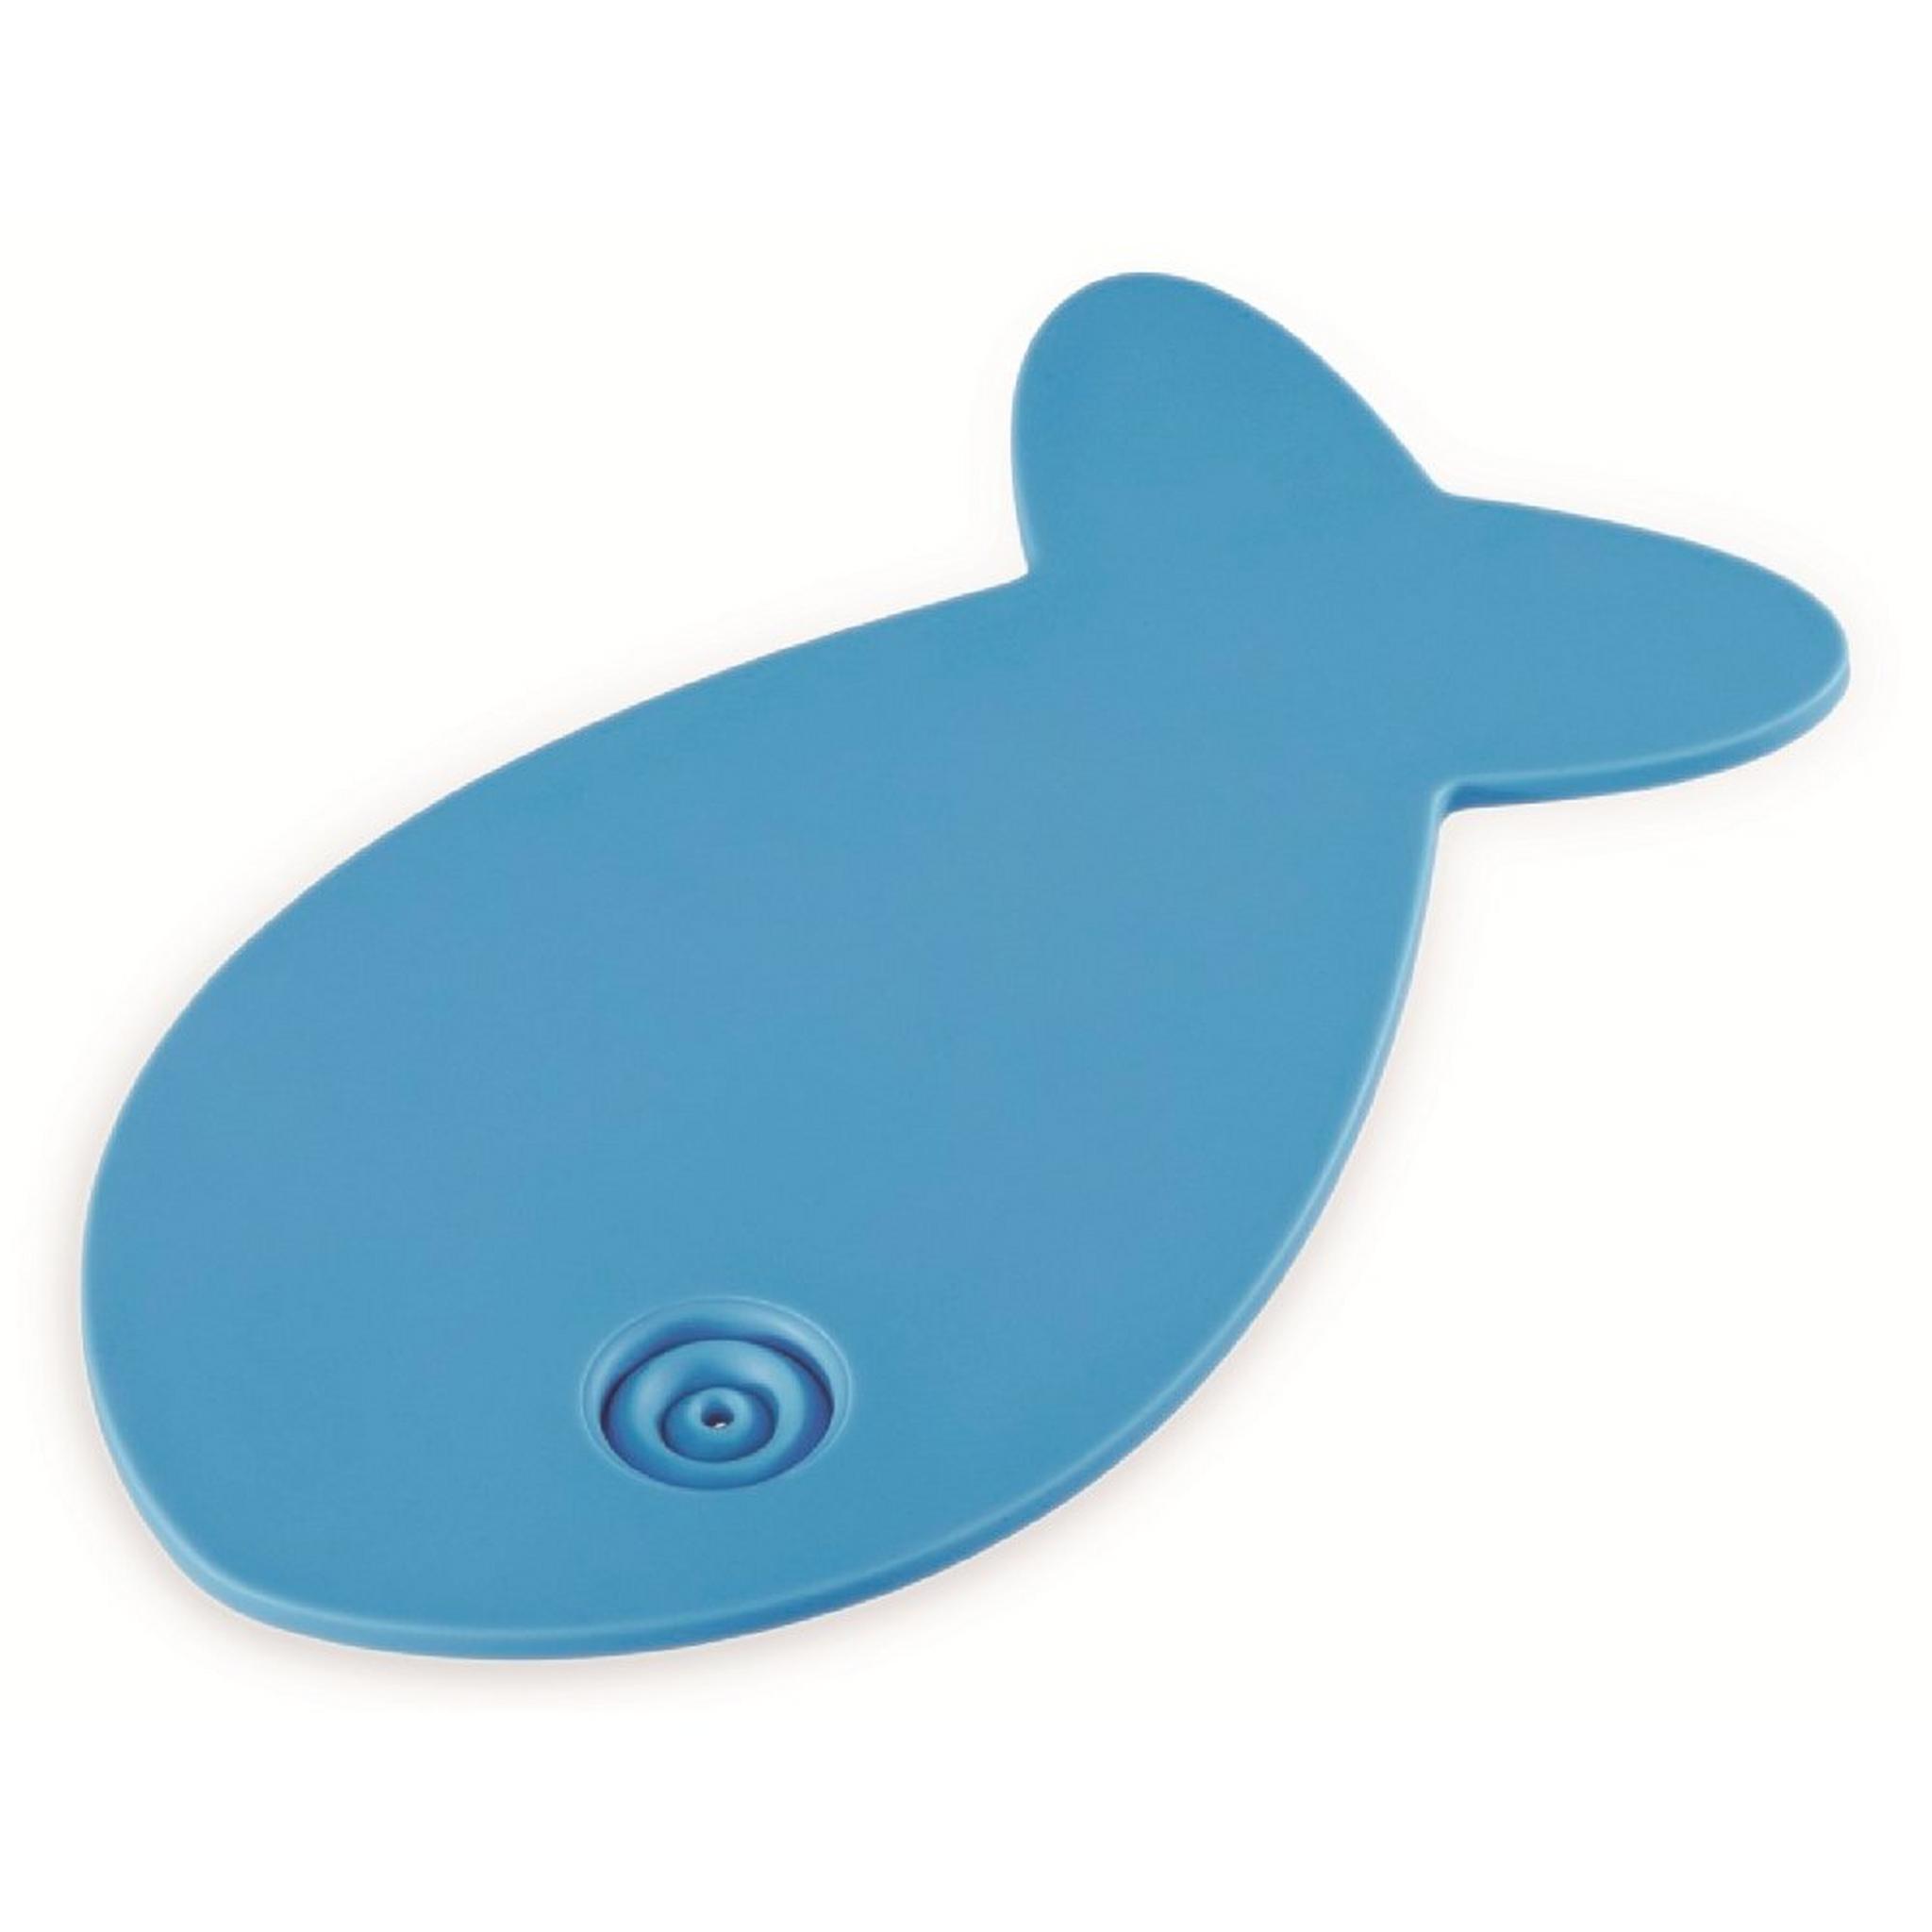 Xavax Silicone Iron Mat with Heat Resistance - Blue